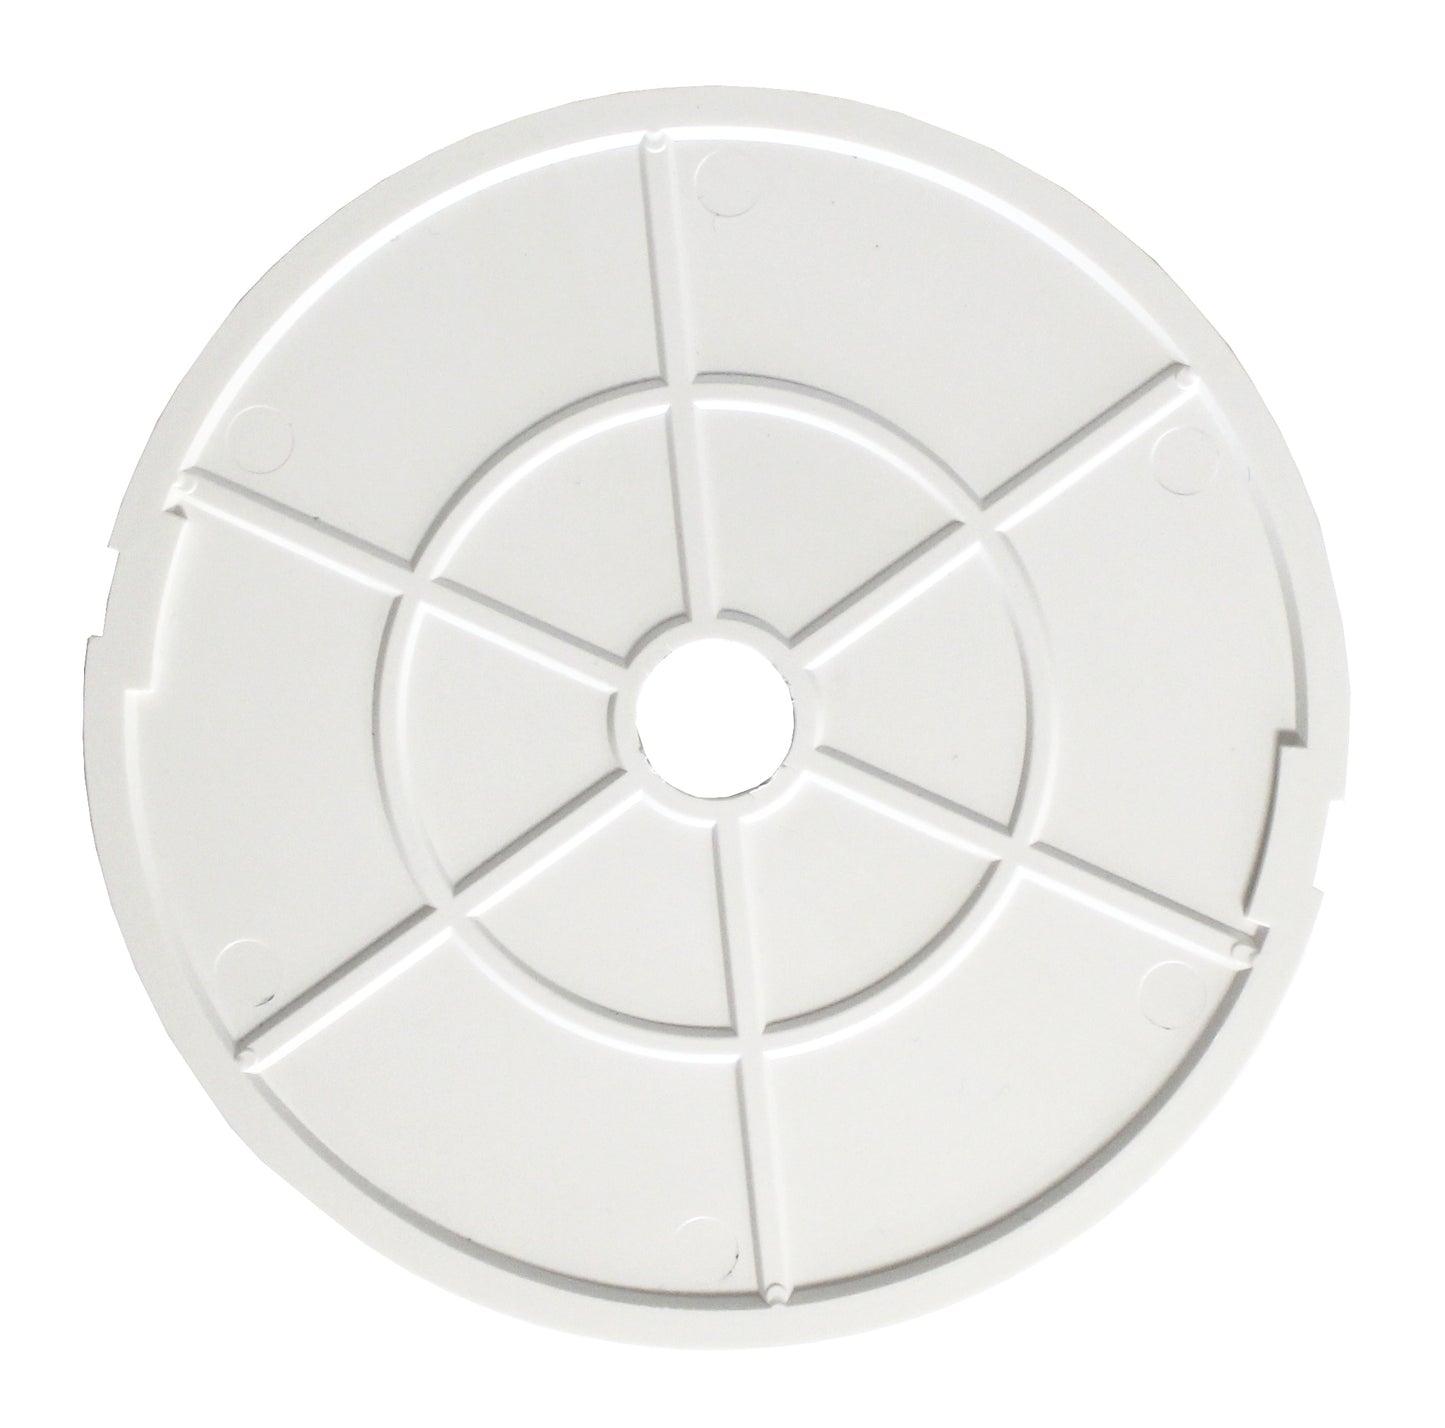 Skimmer Lid SPX1091B Replacement Cover for Hayward Automatic Skimmers